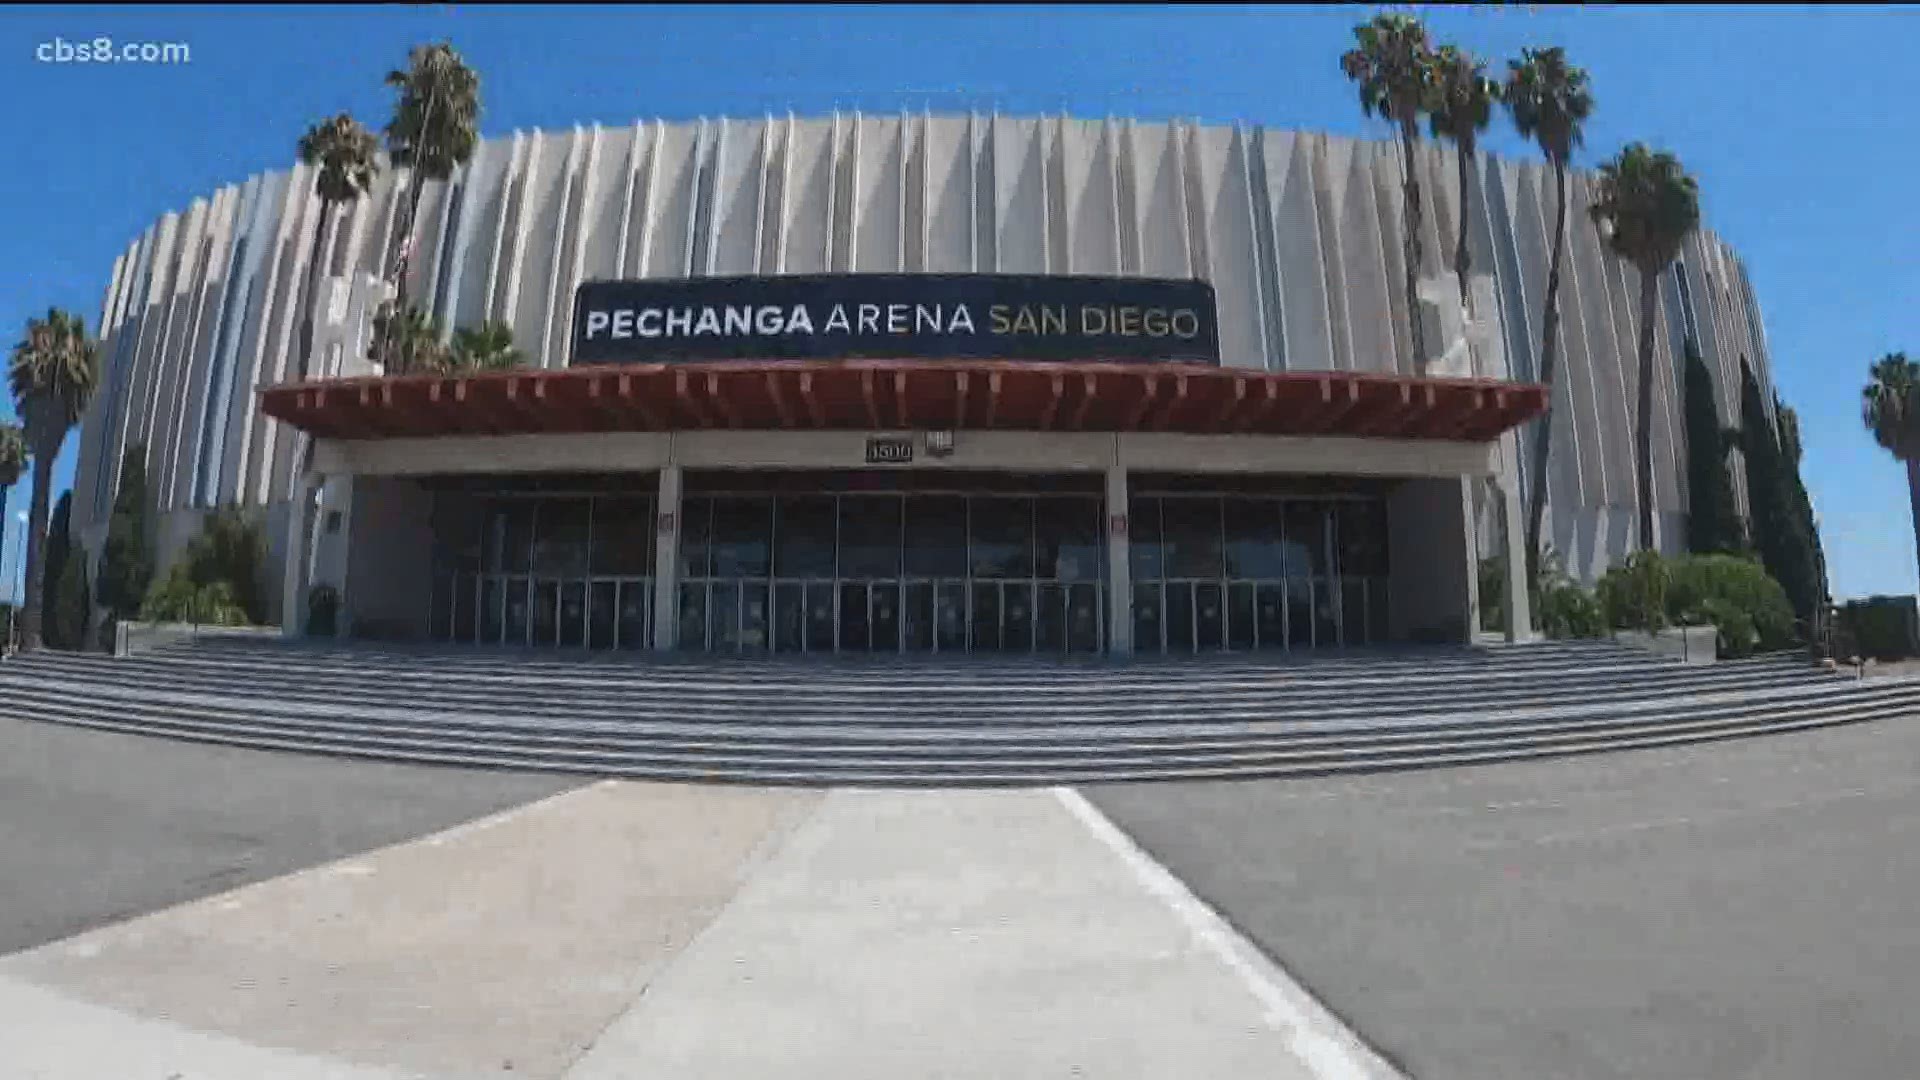 The arena has hosted some of the biggest names in entertainment.